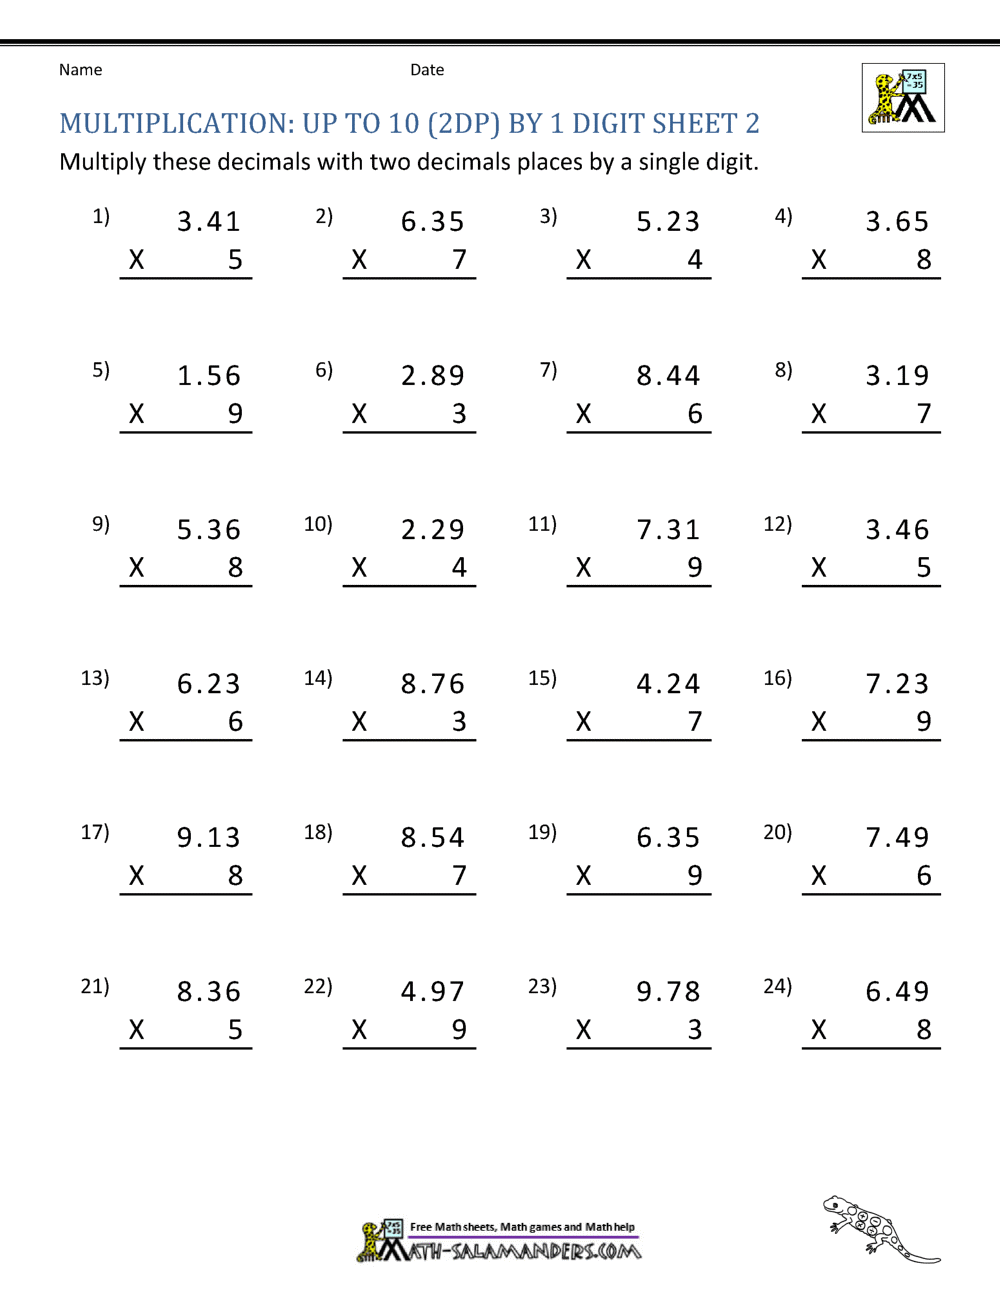 free-math-sheets-multiplication-3-digits-2dp-by-1-digit-2